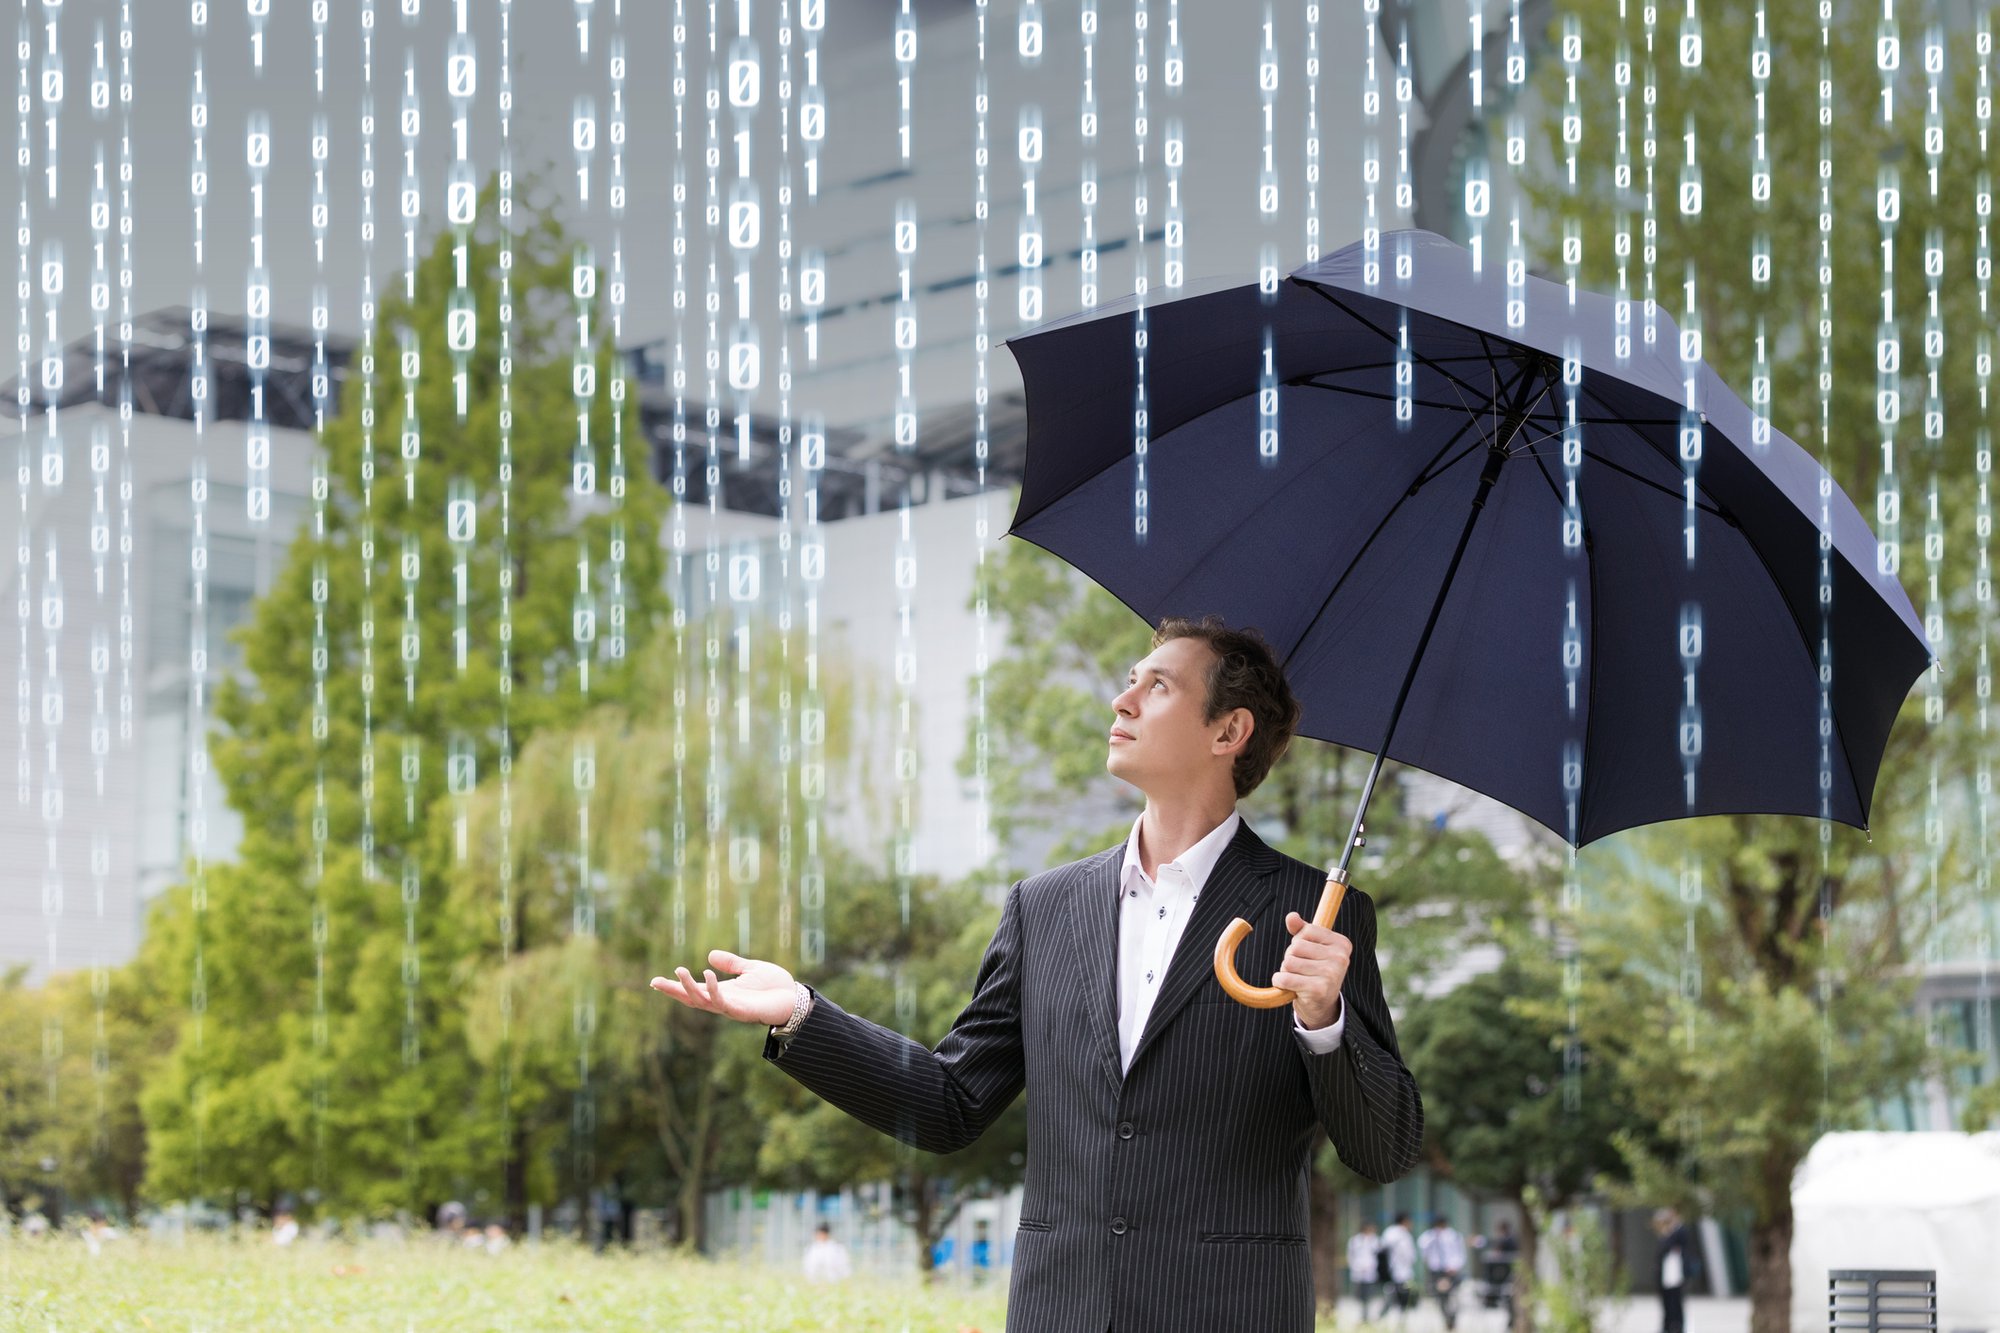 How Weather Changes Can Affect Data Security